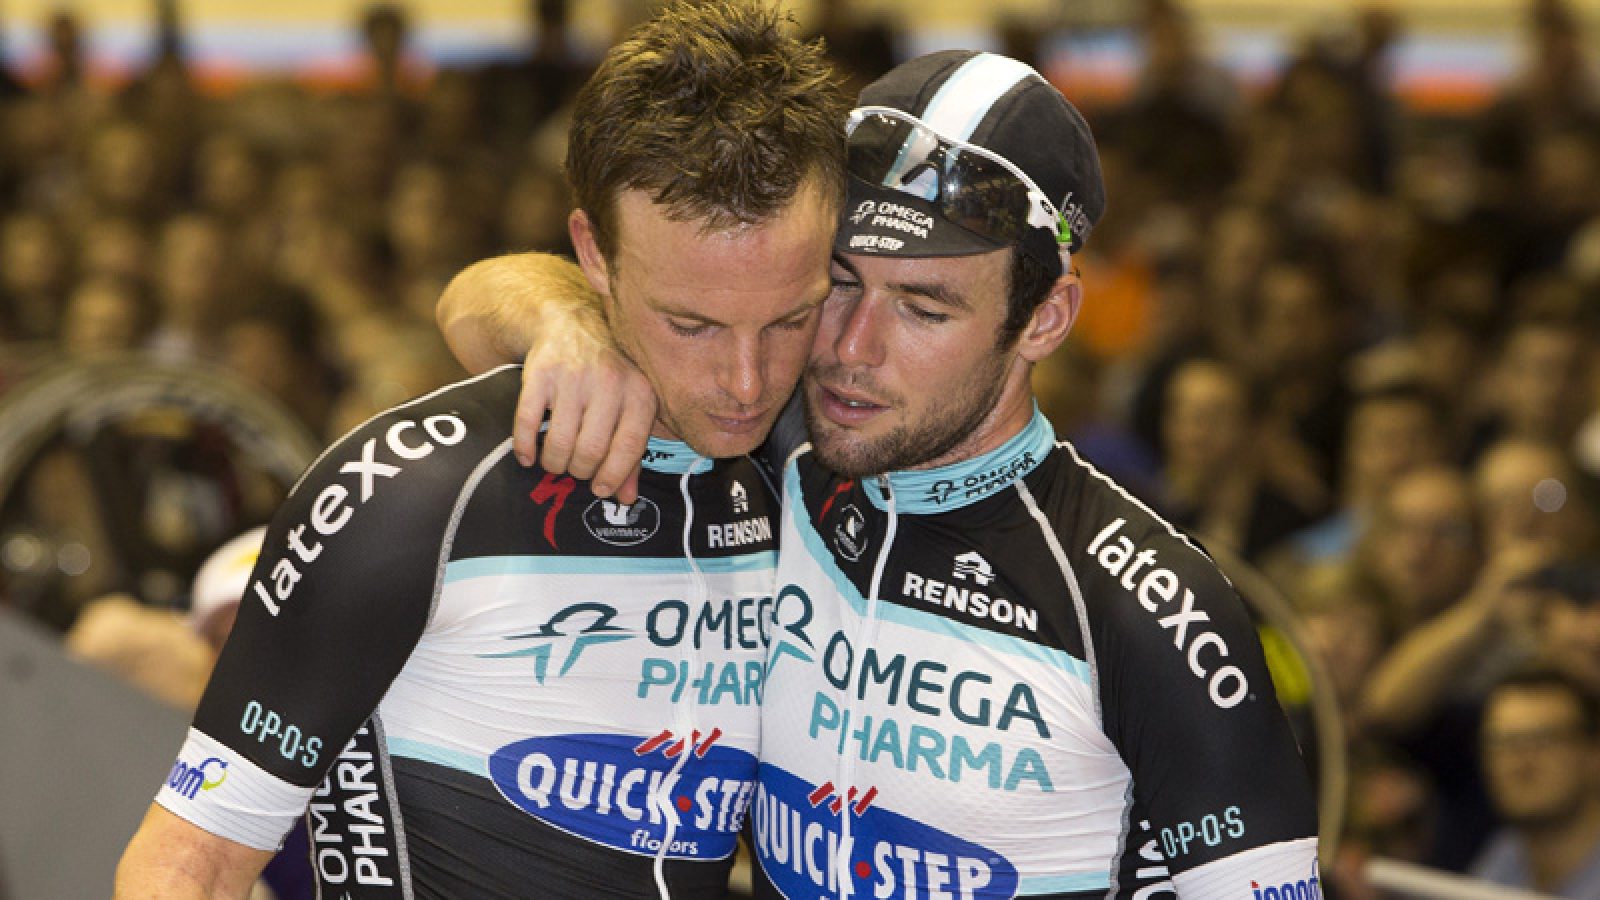 20141123 - GENT, BELGIUM: Belgian Iljo Keisse of team Omega Pharma - Quick Step and British Mark Cavendish of team Omega Pharma - Quick Step show defeat on the podium after the final day of the Zesdaagse Vlaanderen-Gent six-day indoor cycling race at the indoor cycling arena 'Het Kuipke', Sunday 23 November 2014, in Gent. The 74th edition takes place from November 18th until November 23rd. BELGA PHOTO KRISTOF VAN ACCOM